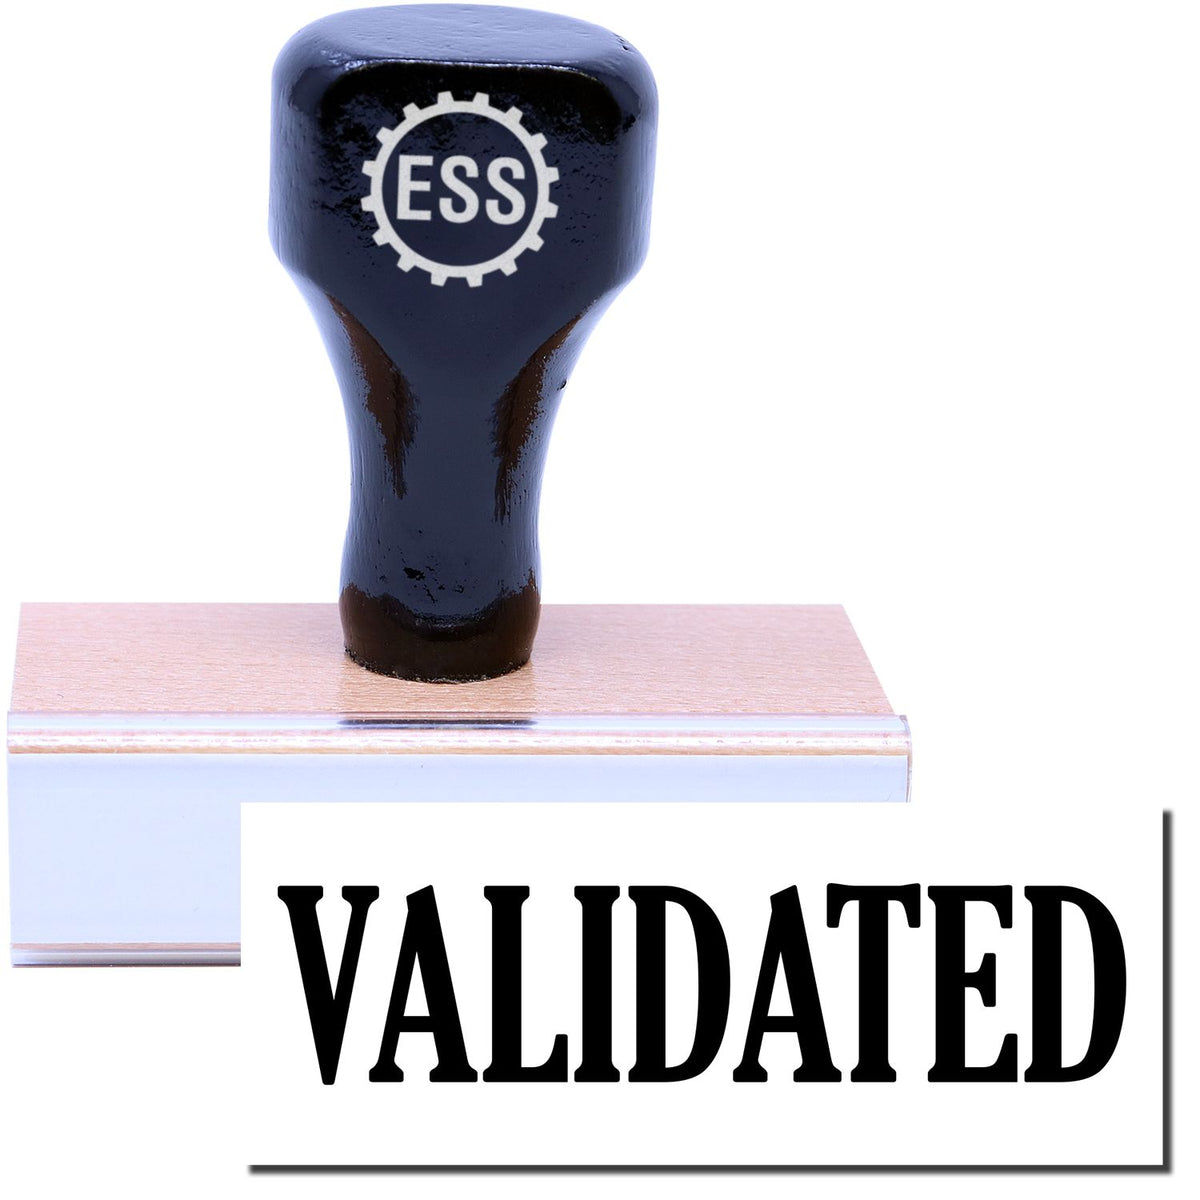 A stock office rubber stamp with a stamped image showing how the text &quot;VALIDATED&quot; in a large font is displayed after stamping.